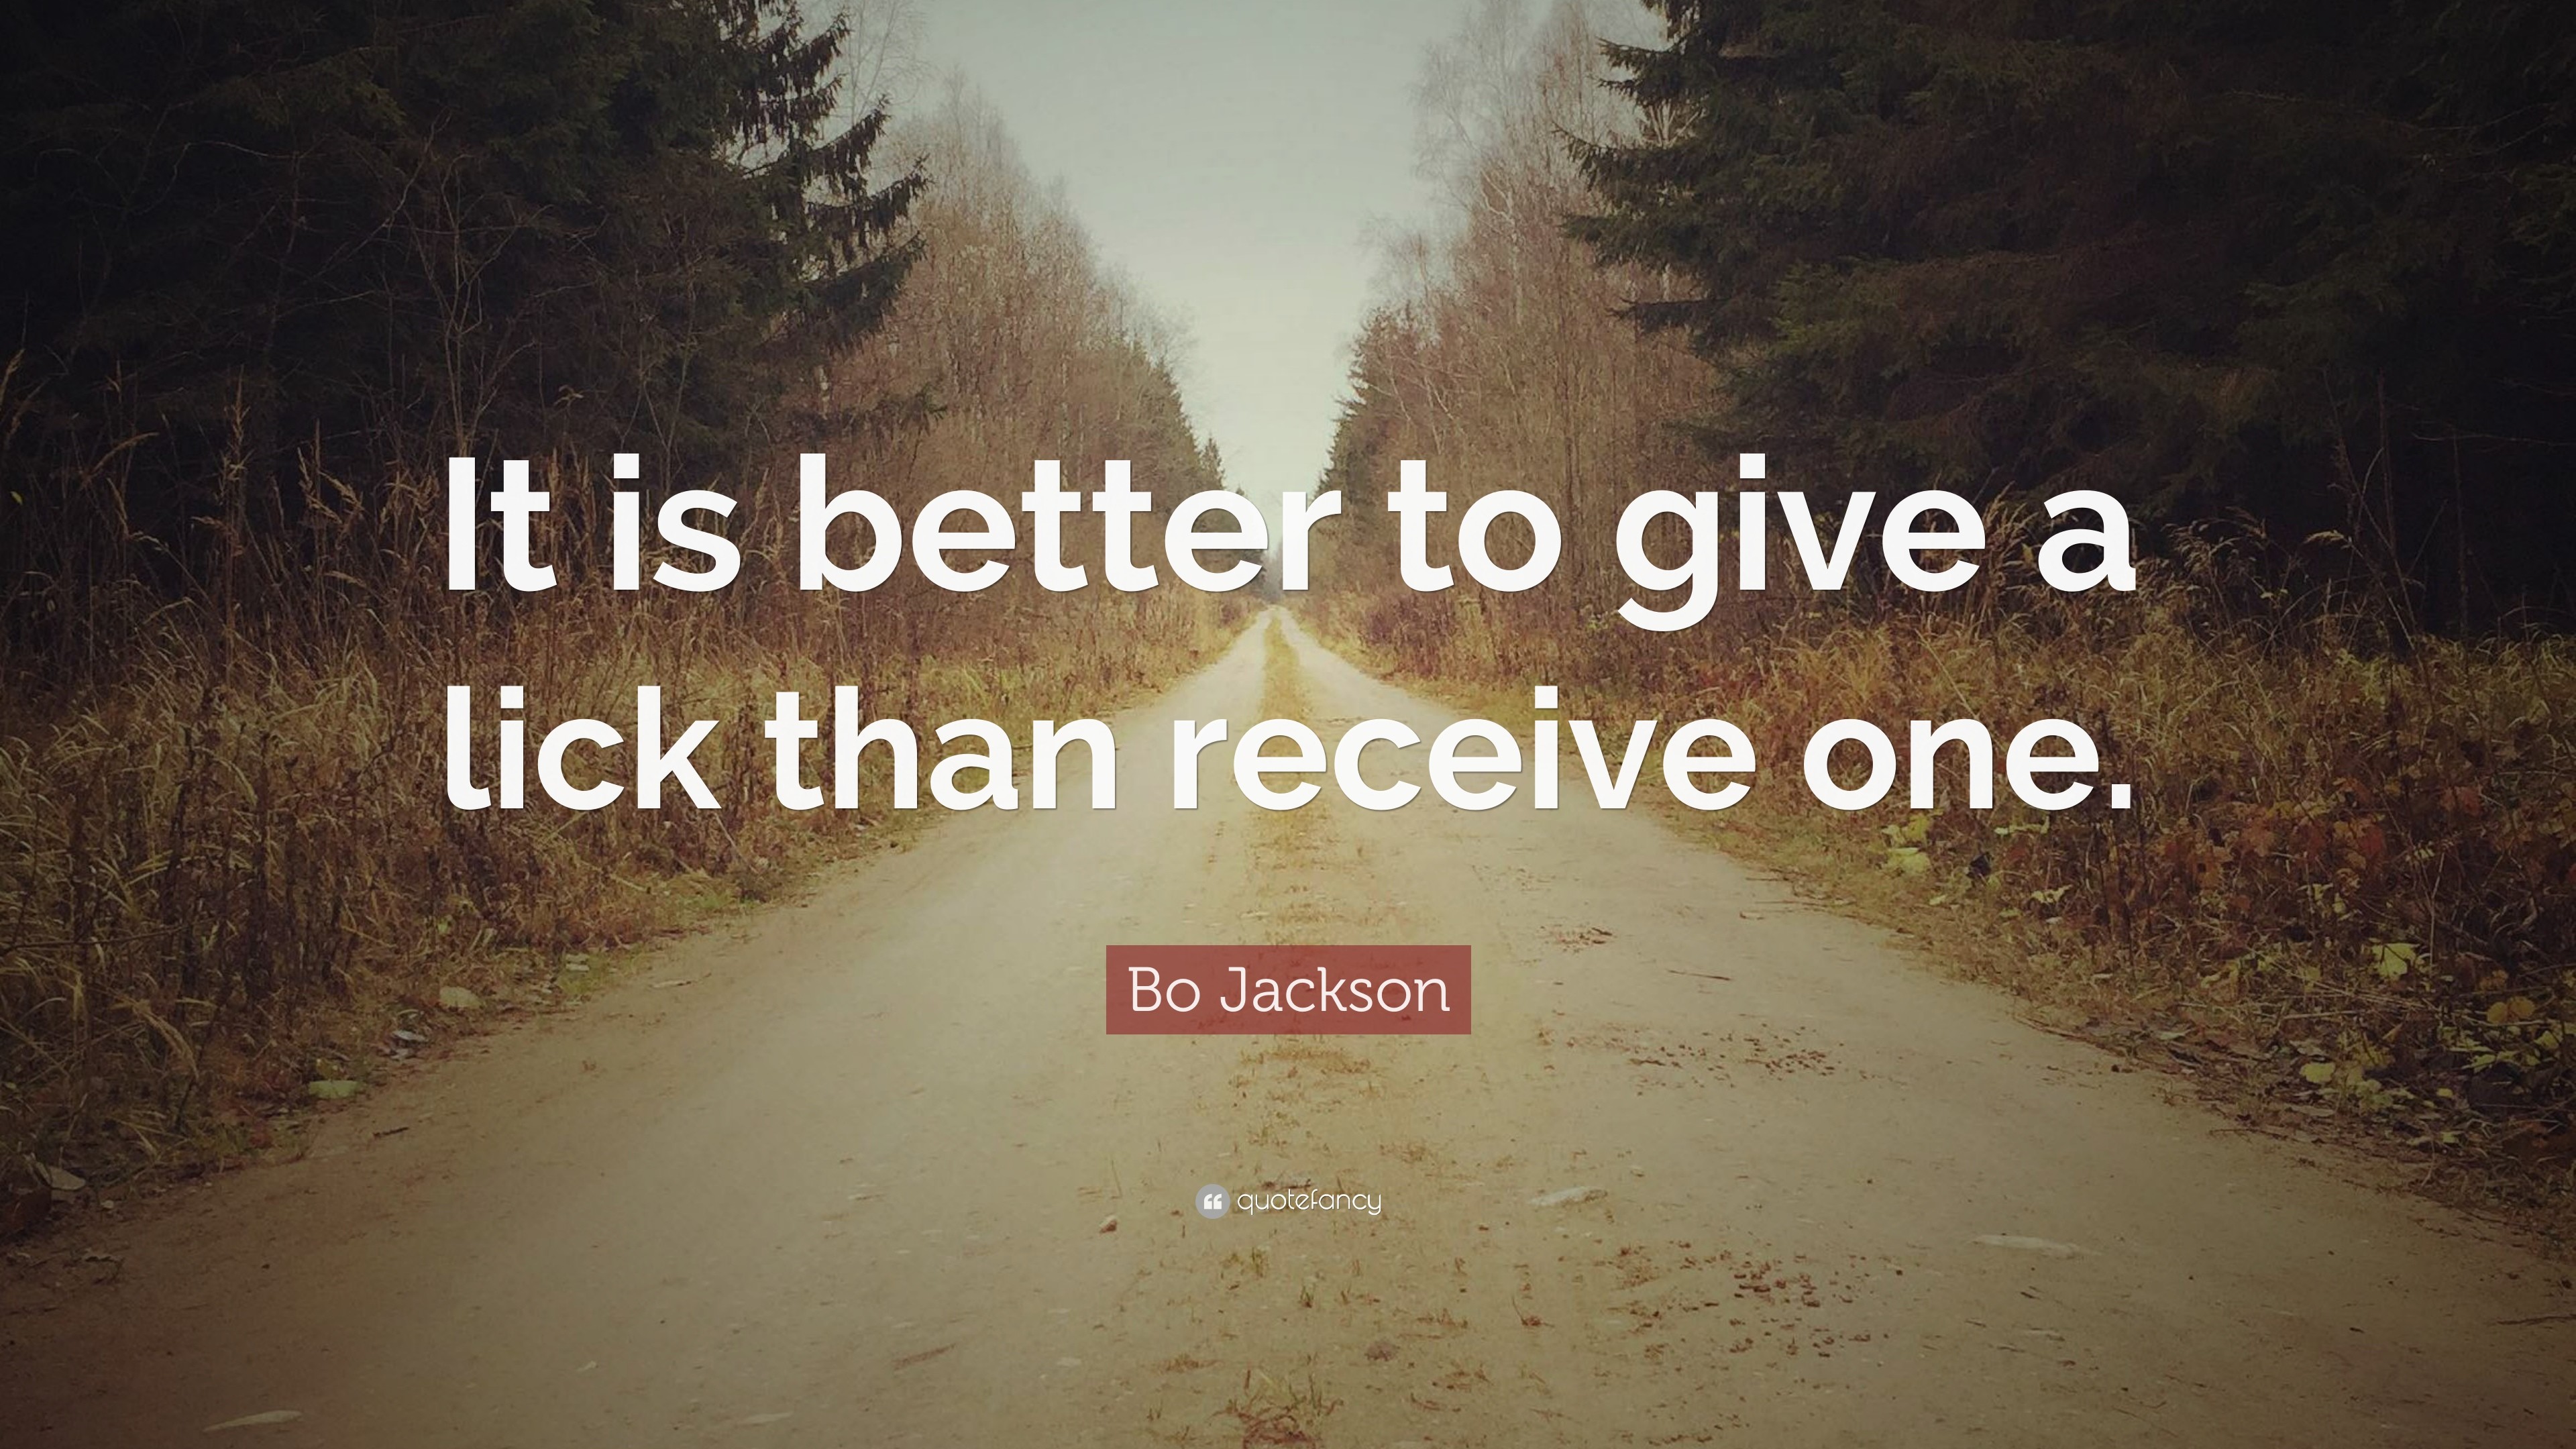 Bo Jackson Quote It is better to give a lick than receive one